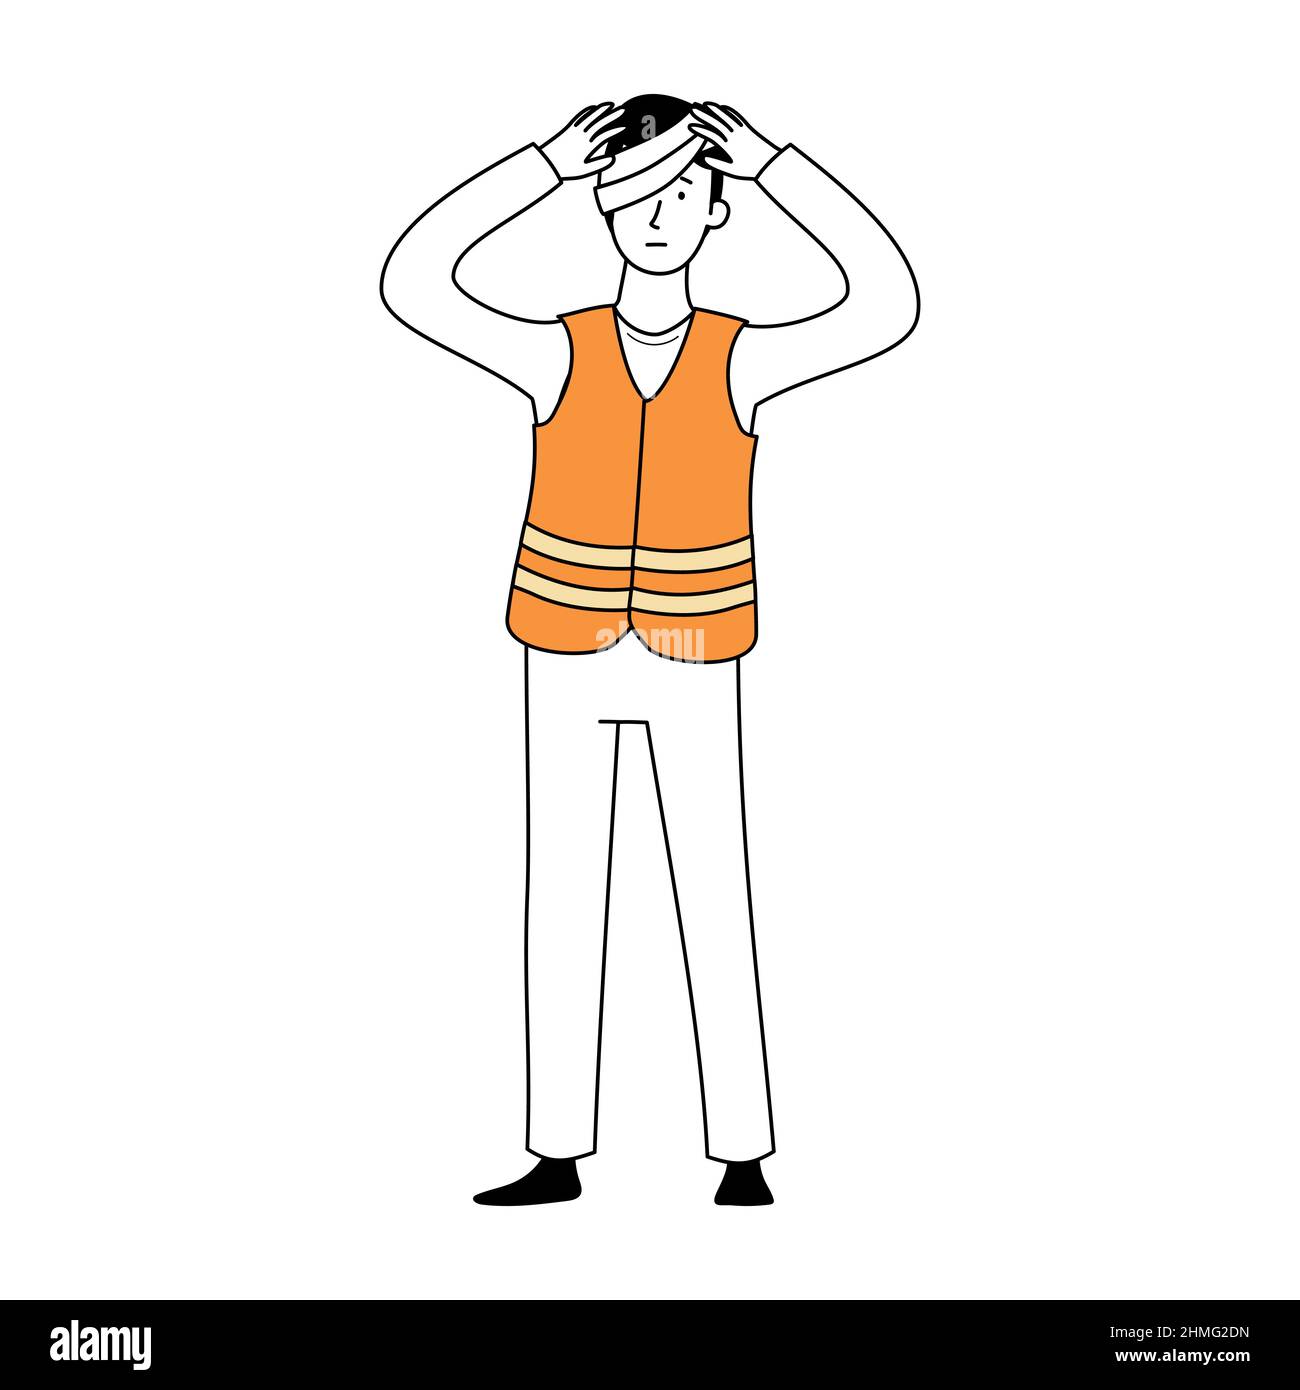 Worker with injury head. Fall accident on work. Doodle line style character. Vector illustration. Stock Vector